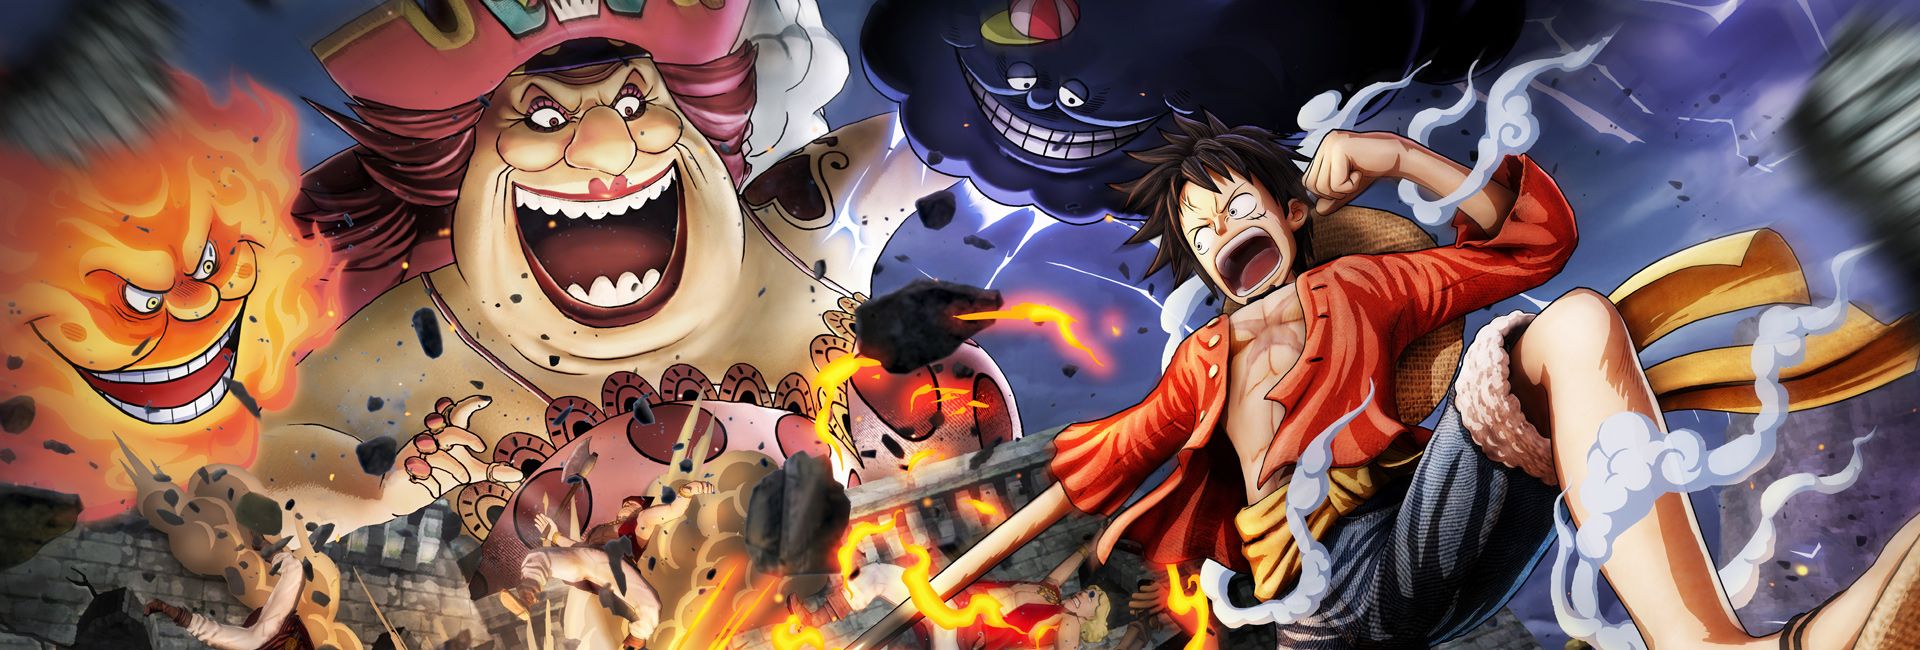 One Piece Pirate Warriors 4 continue d